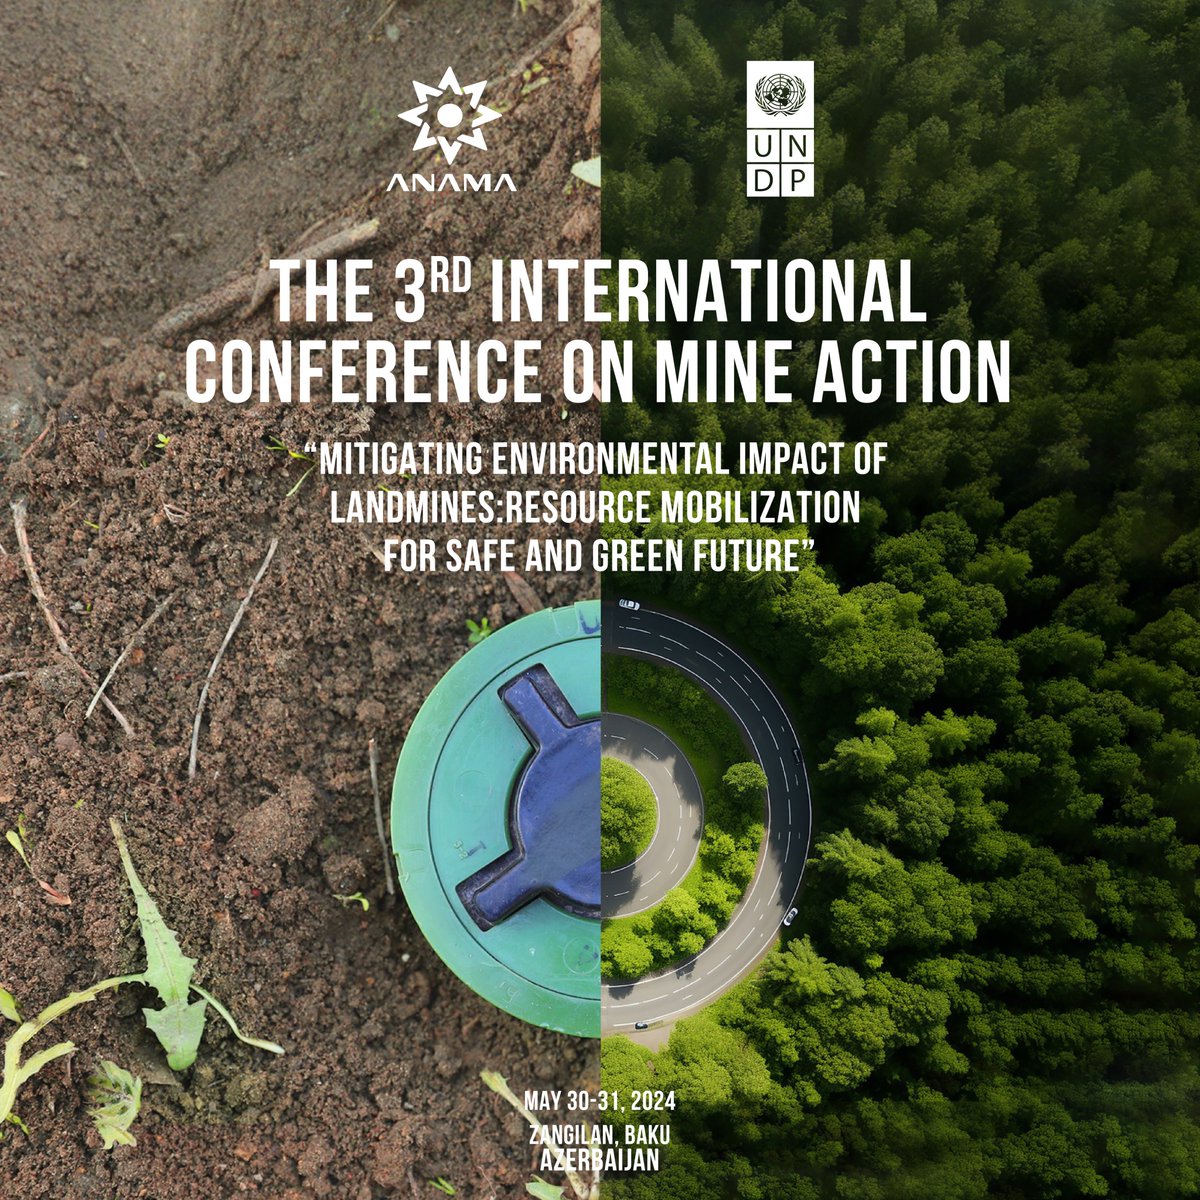 As every year, Mine Action Agency of the Republic of Azerbaijan is hosting an international conference this year. The topic of this year’s conference is “Mitigating Environmental Impact of Landmines: Resource Mobilization for a Safe and Green Future”. The conference will be held